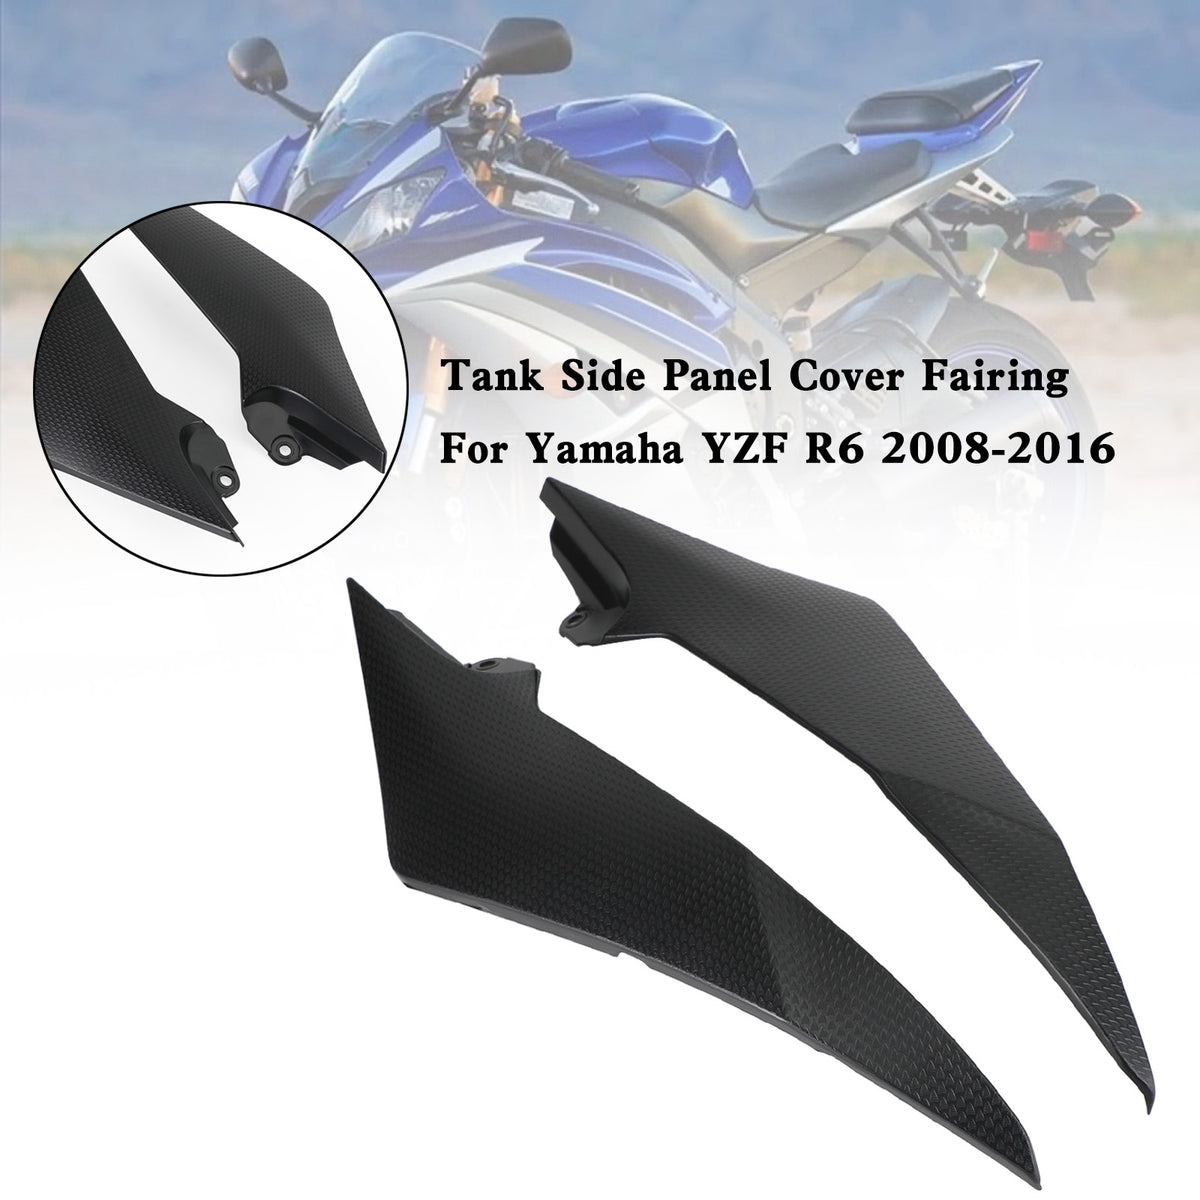 Gas Tank Side Trim Cover Panel Fairing Cowl For Yamaha YZF R6 2008-2016